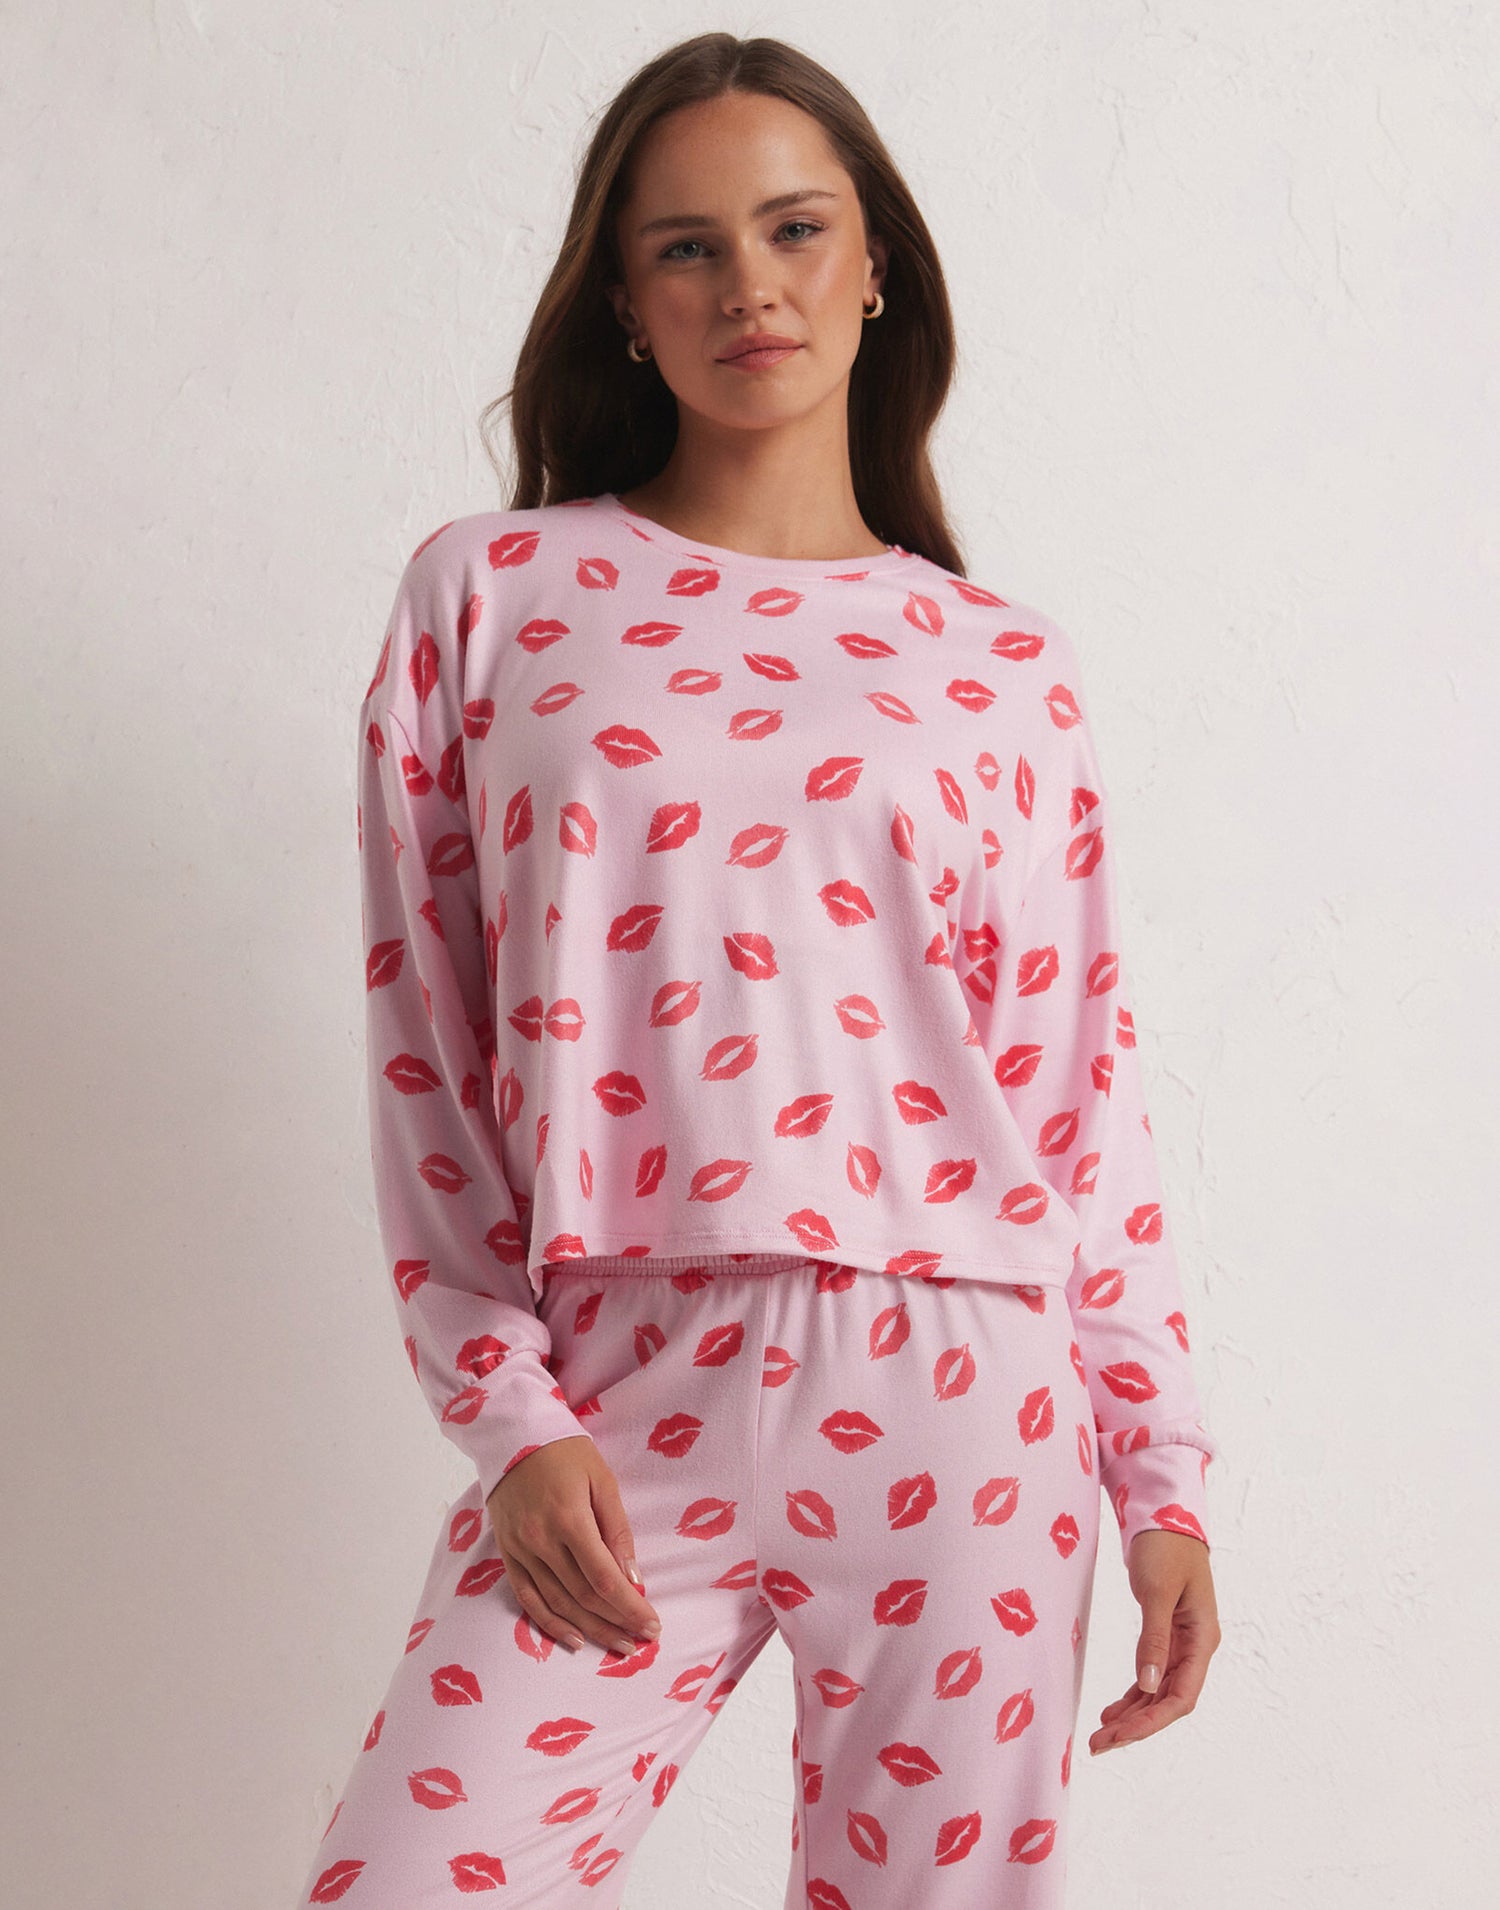 Pucker Up Kisses Long Sleeve Lounge Top by Z Supply in Cotton Candy - Front View